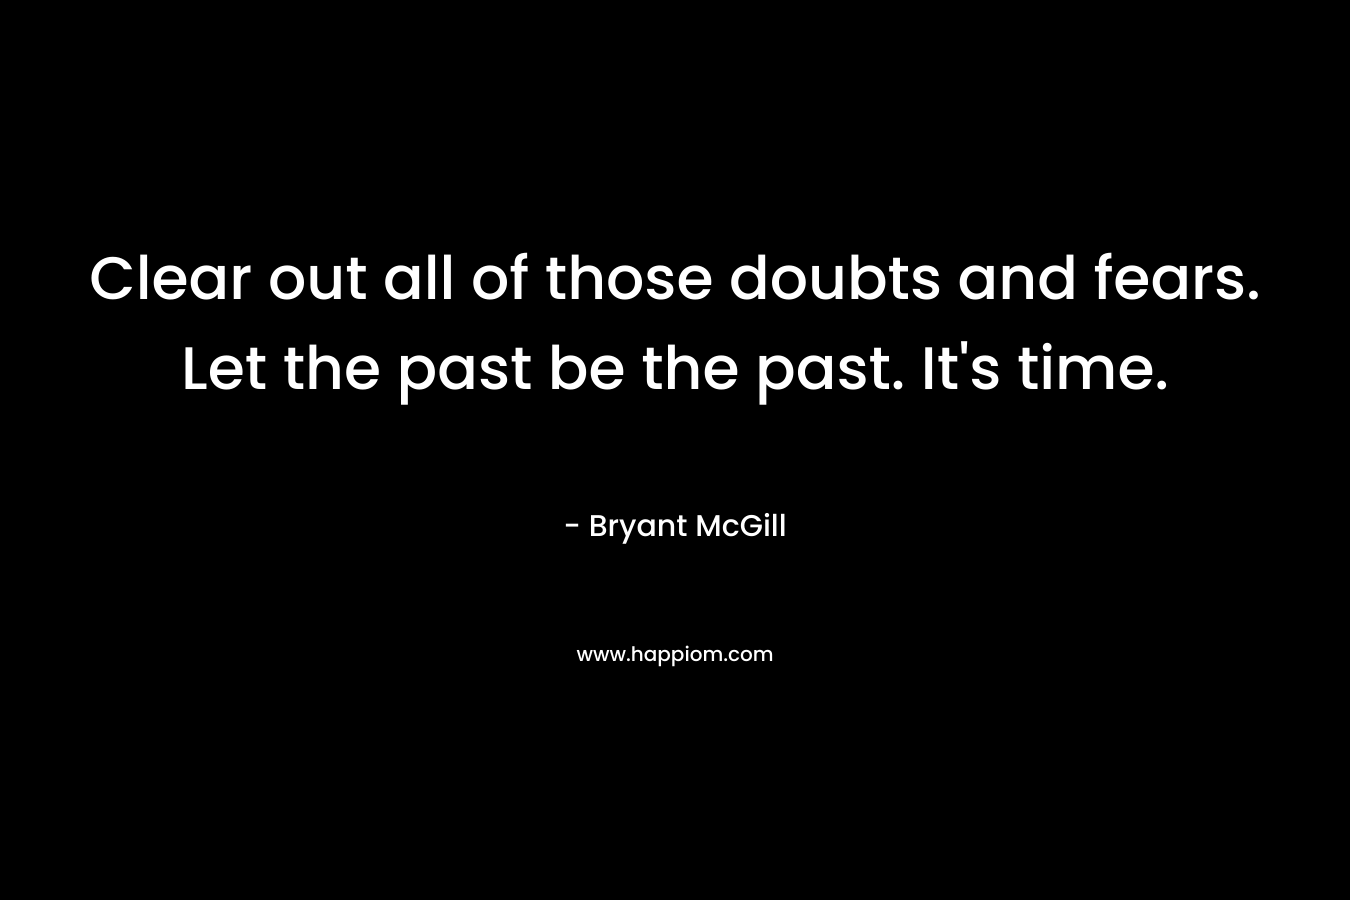 Clear out all of those doubts and fears. Let the past be the past. It's time.